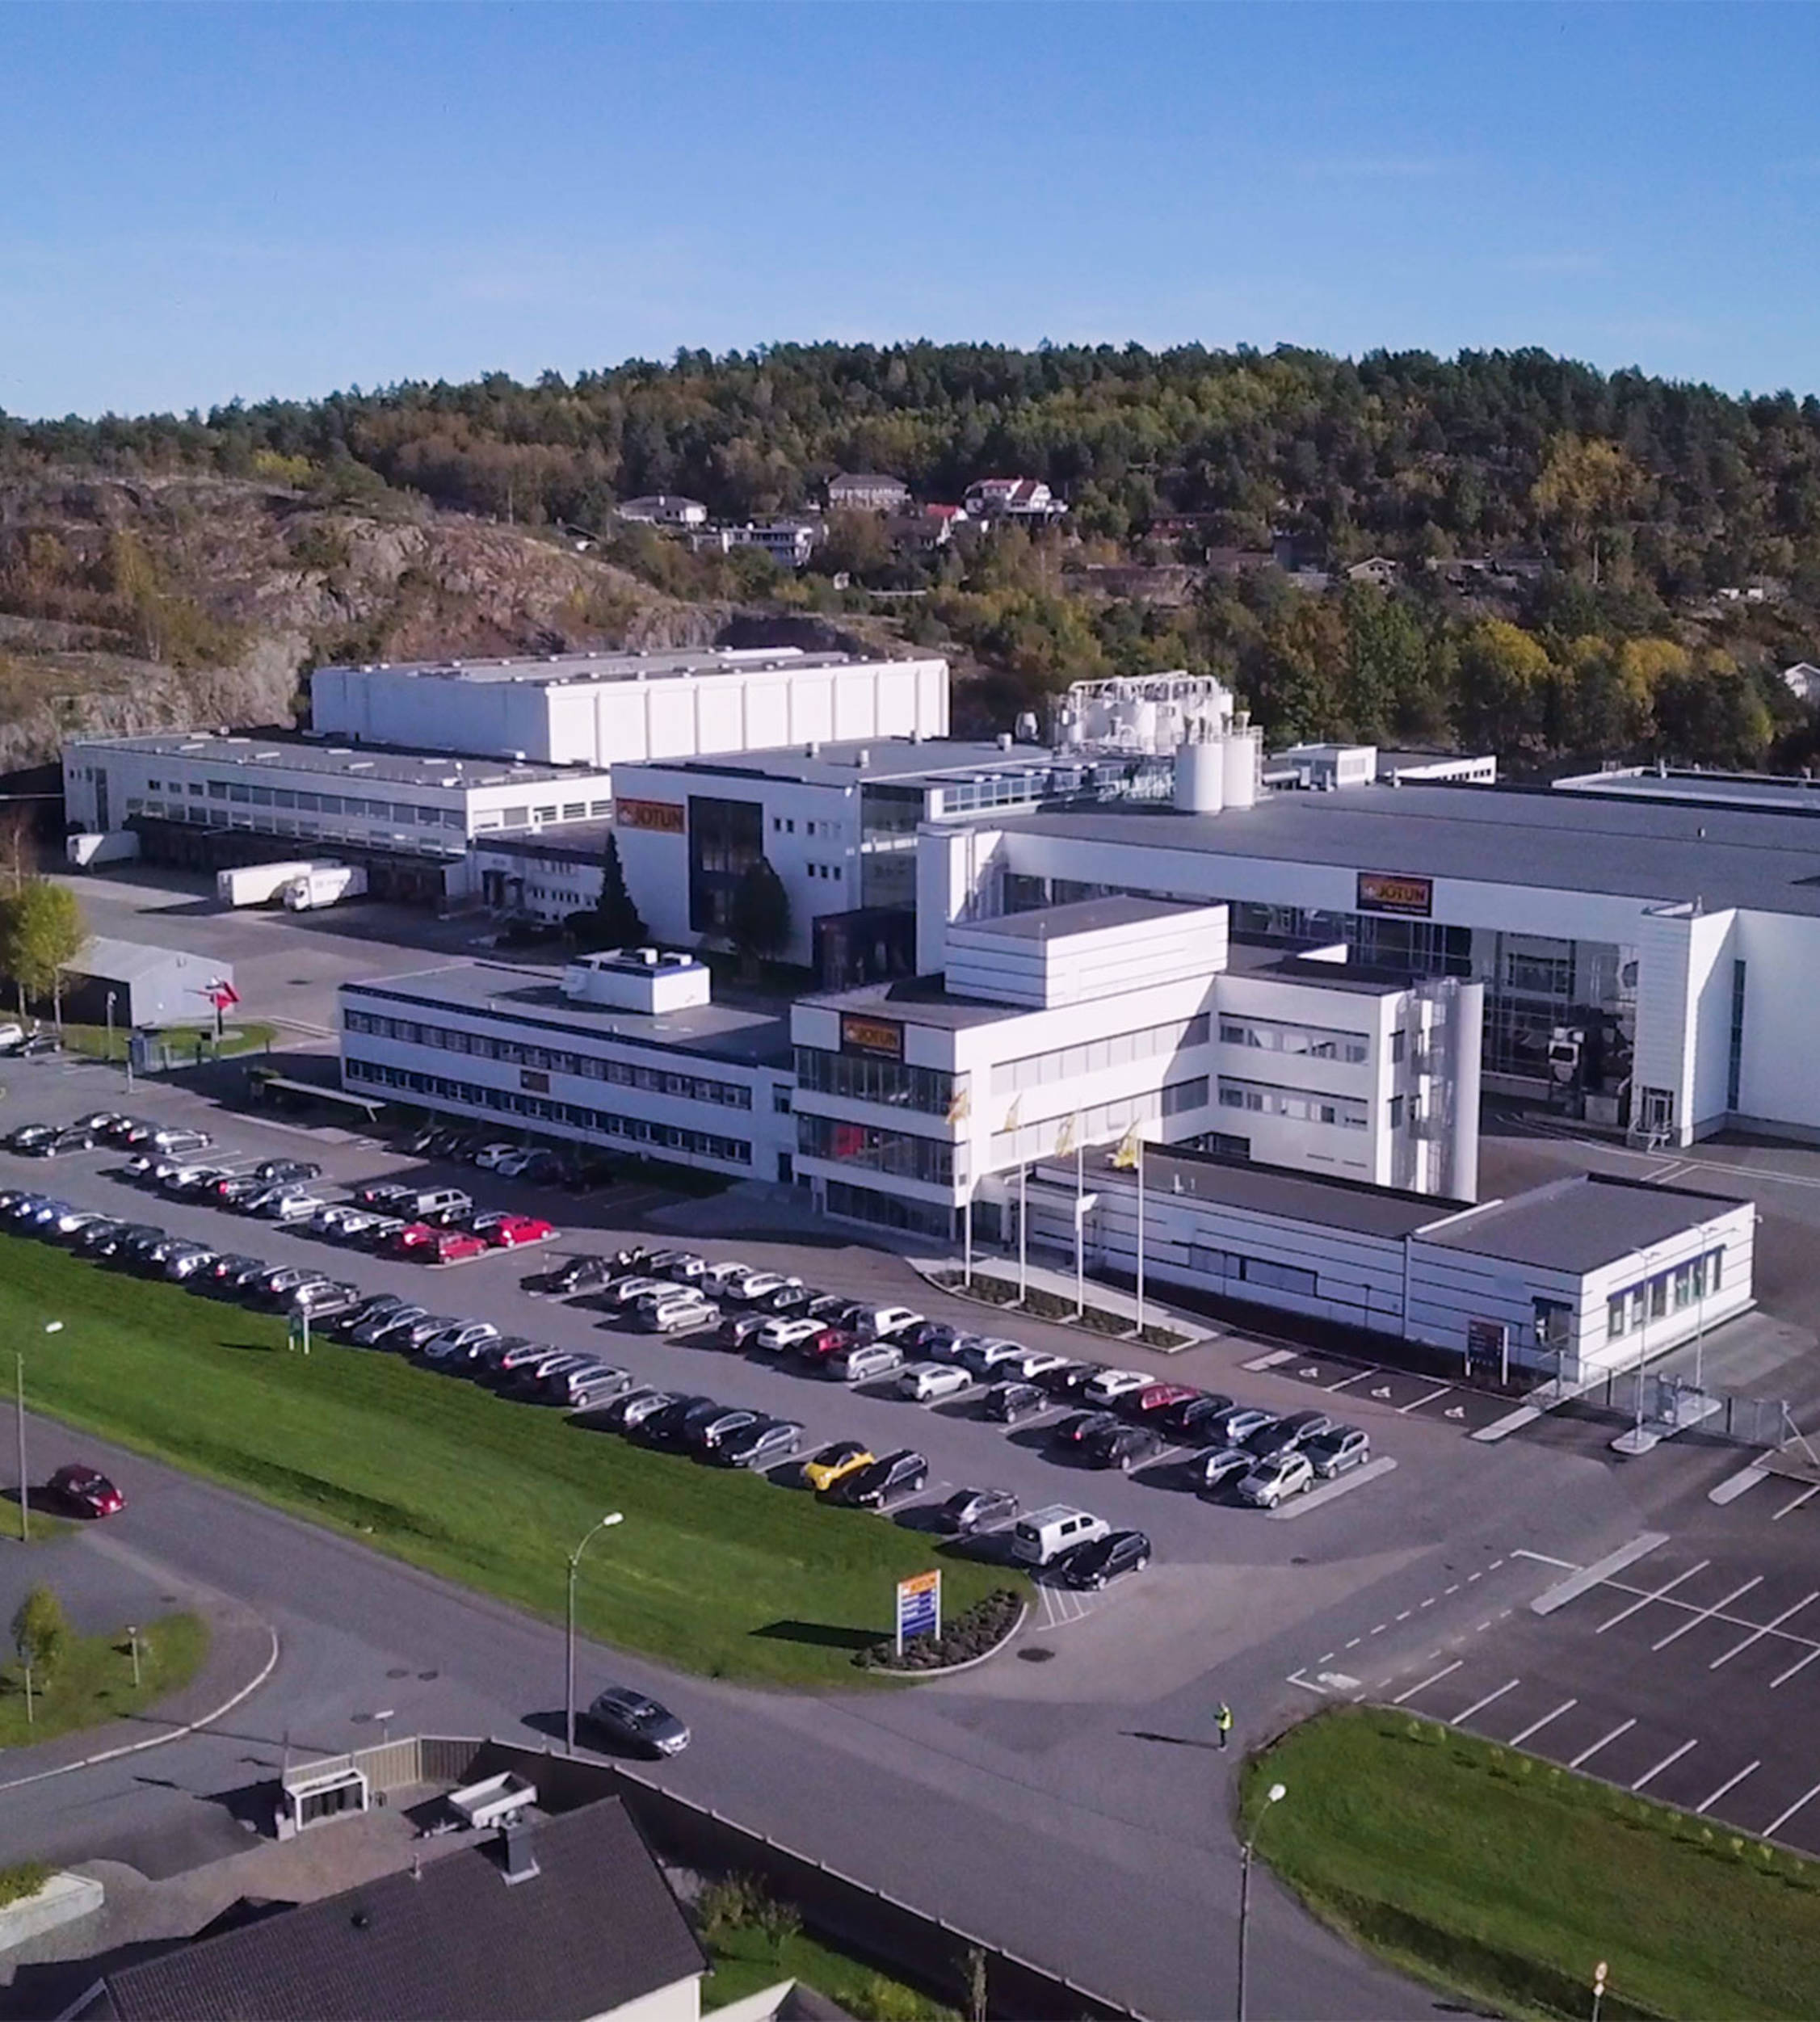 Drone view of Jotun's factory at Vindal in Norway